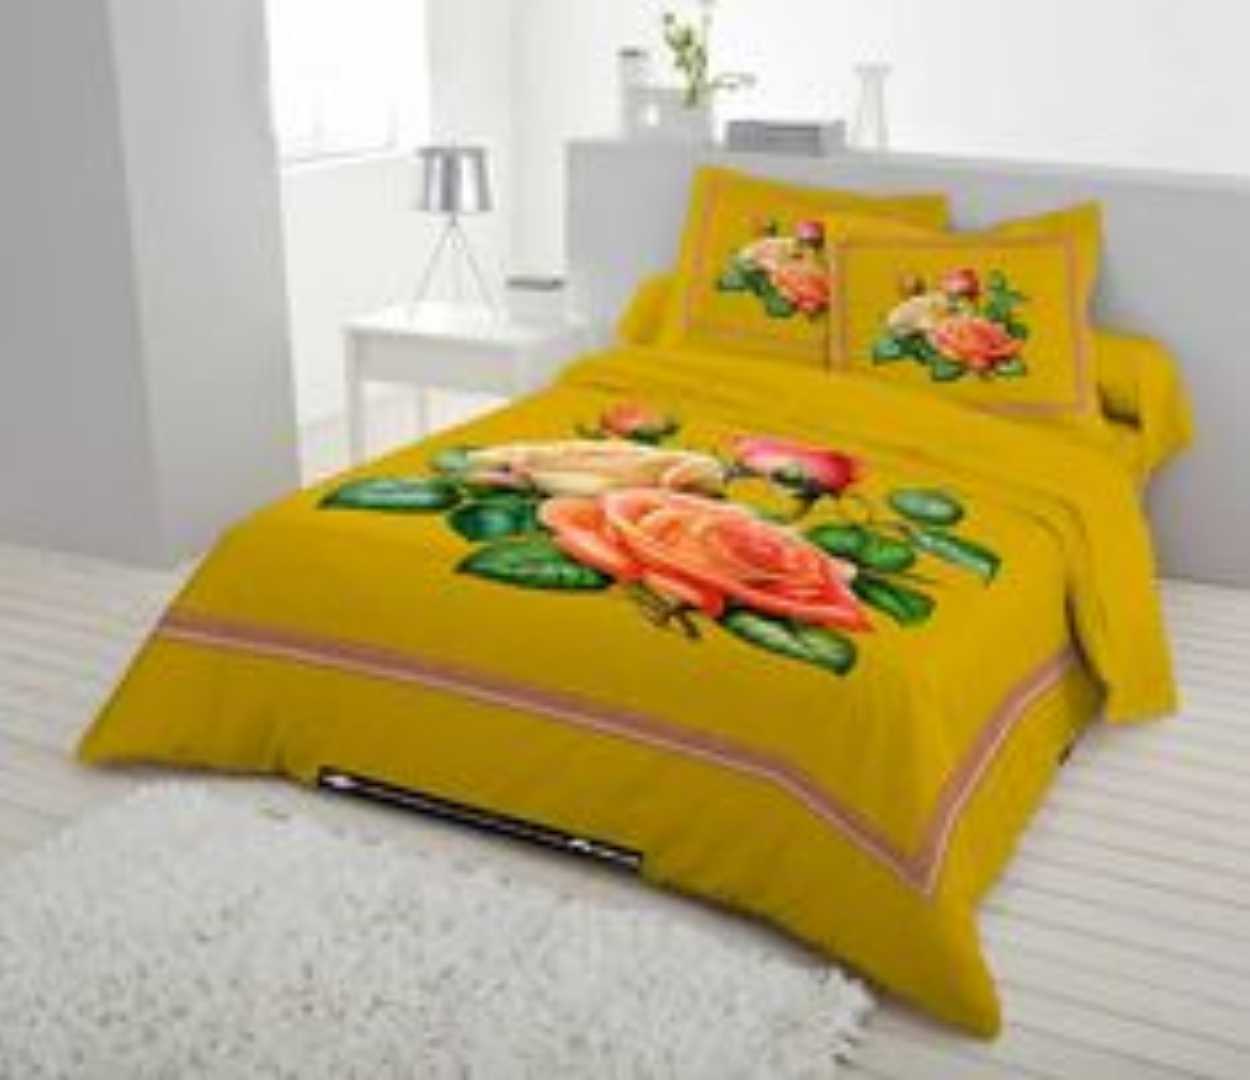 double cotton bed sheets online,cotton bed sheets online,super king size bed sheets online,double bedsheets online,bedsheet online,bed sheets online shopping lowest price